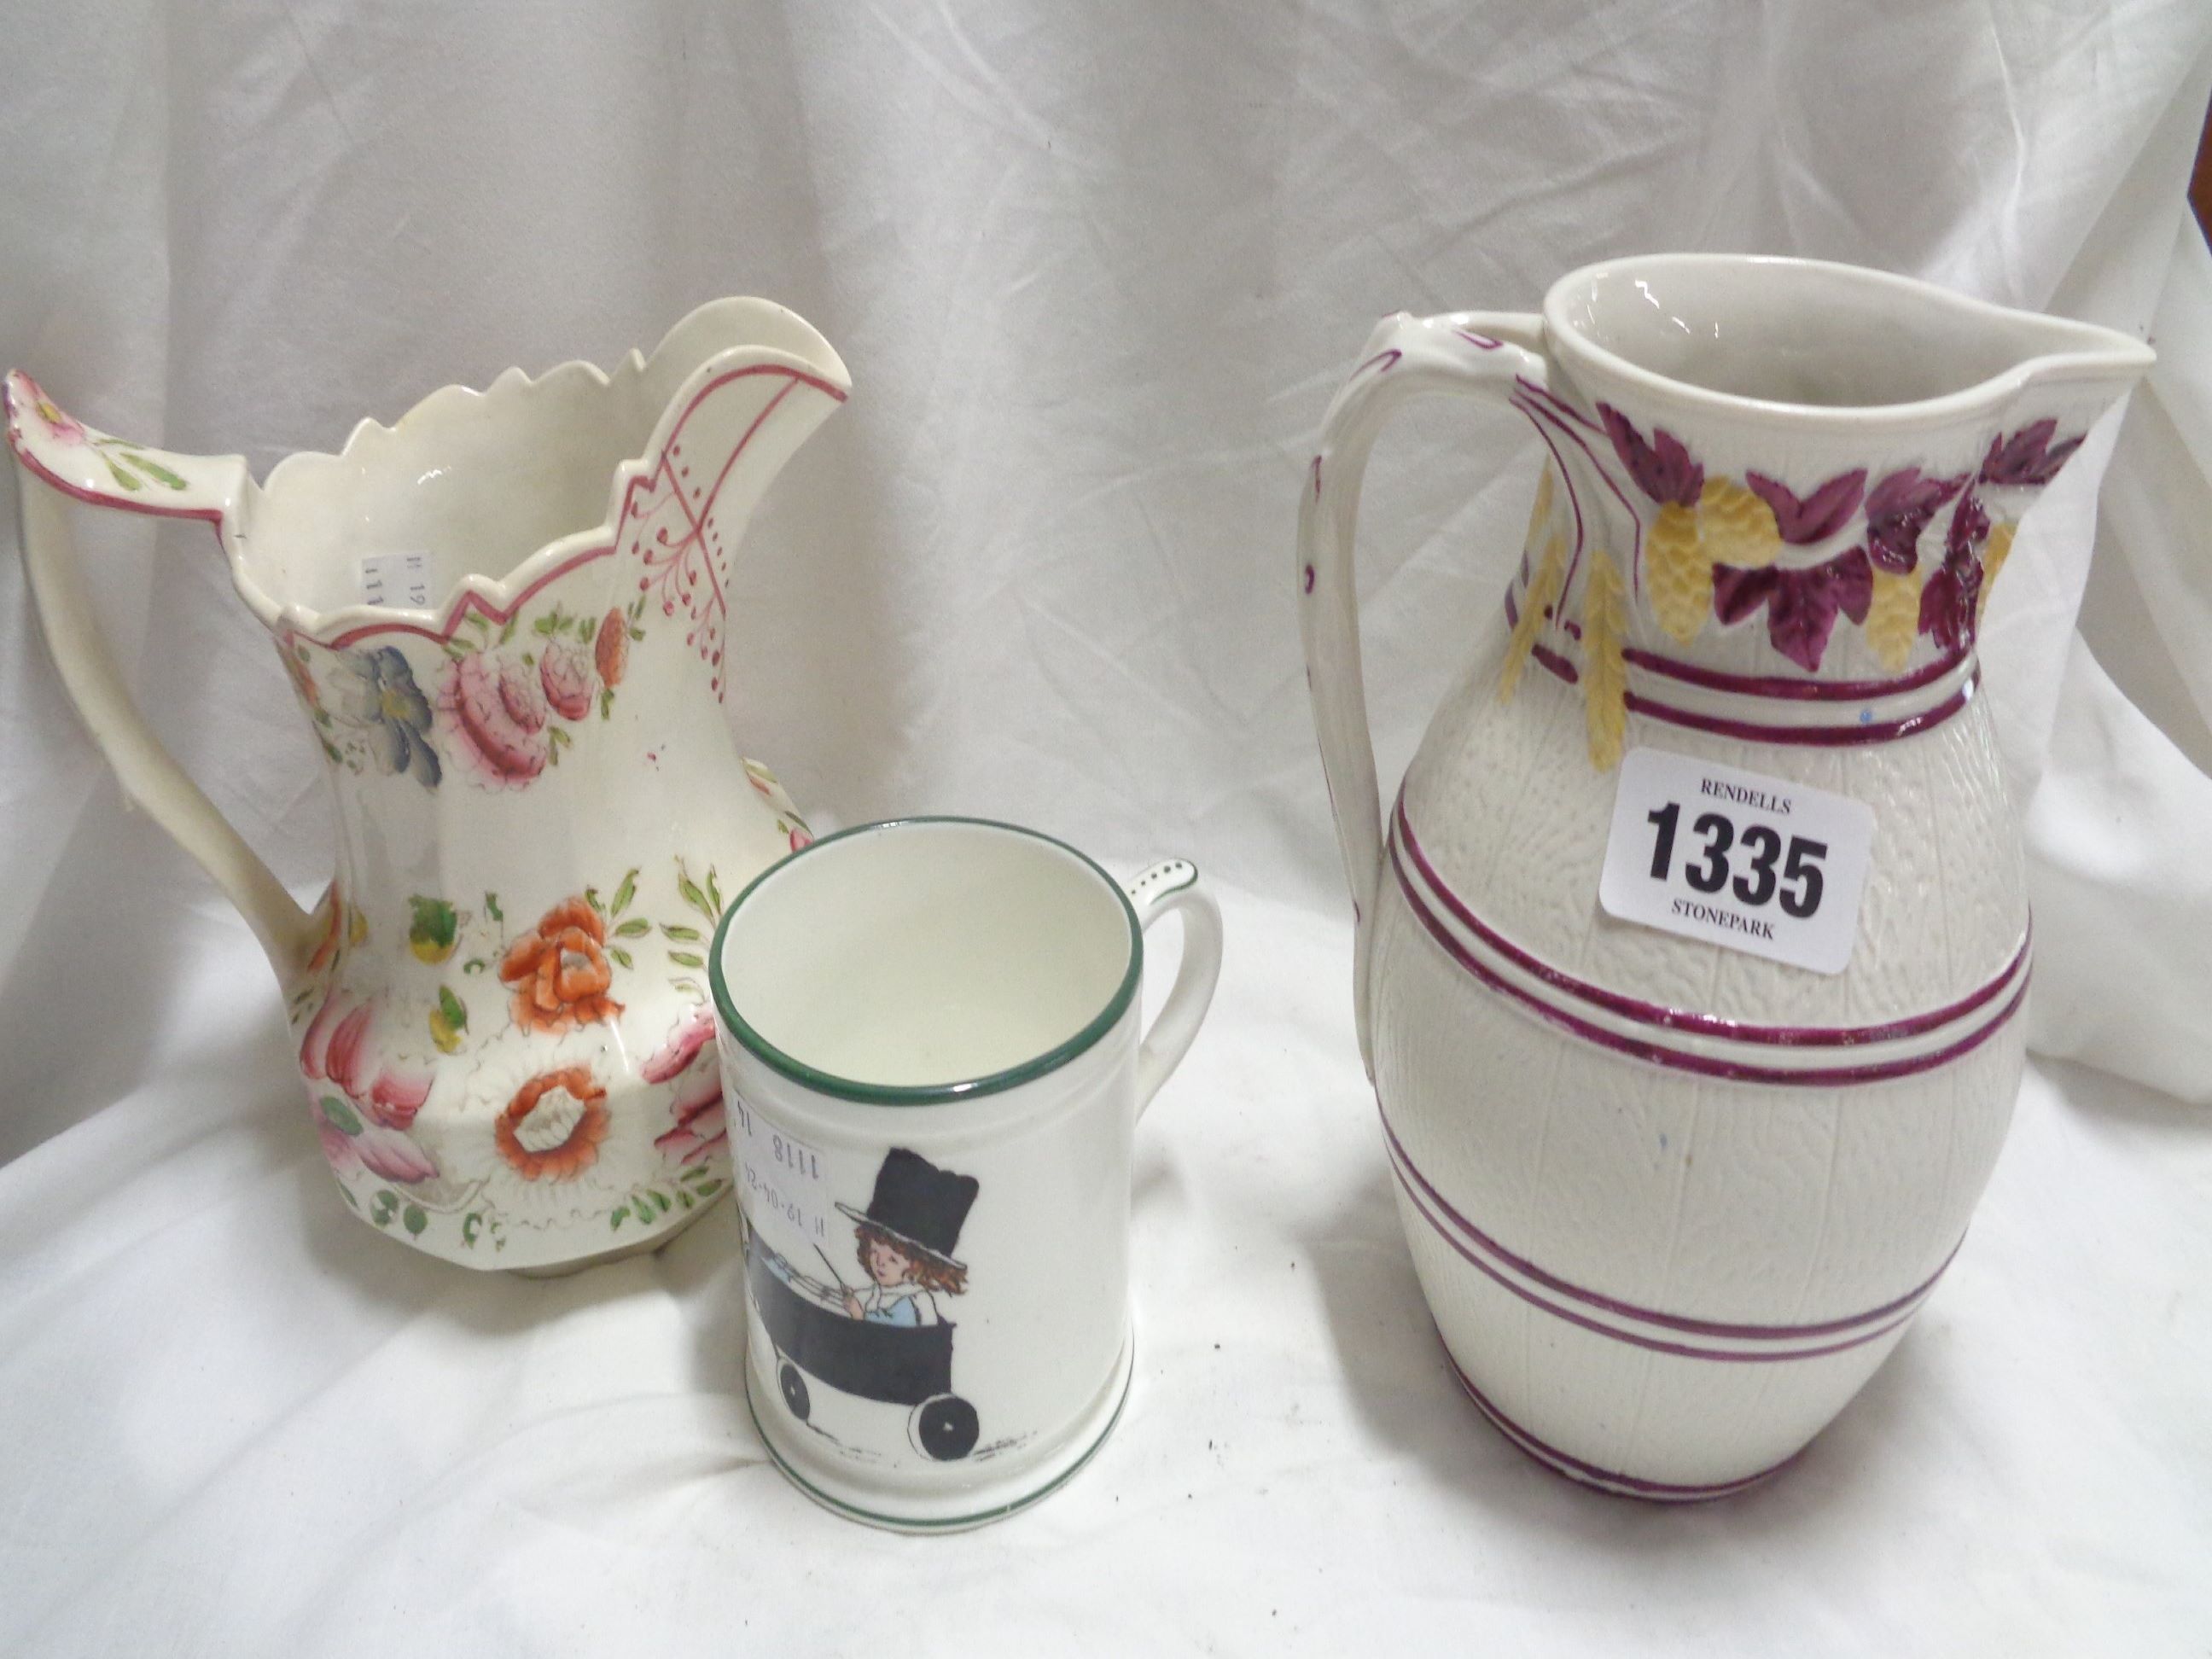 An early 20th Century Hammersley bone china mug with transfer printed decoration, depicting a